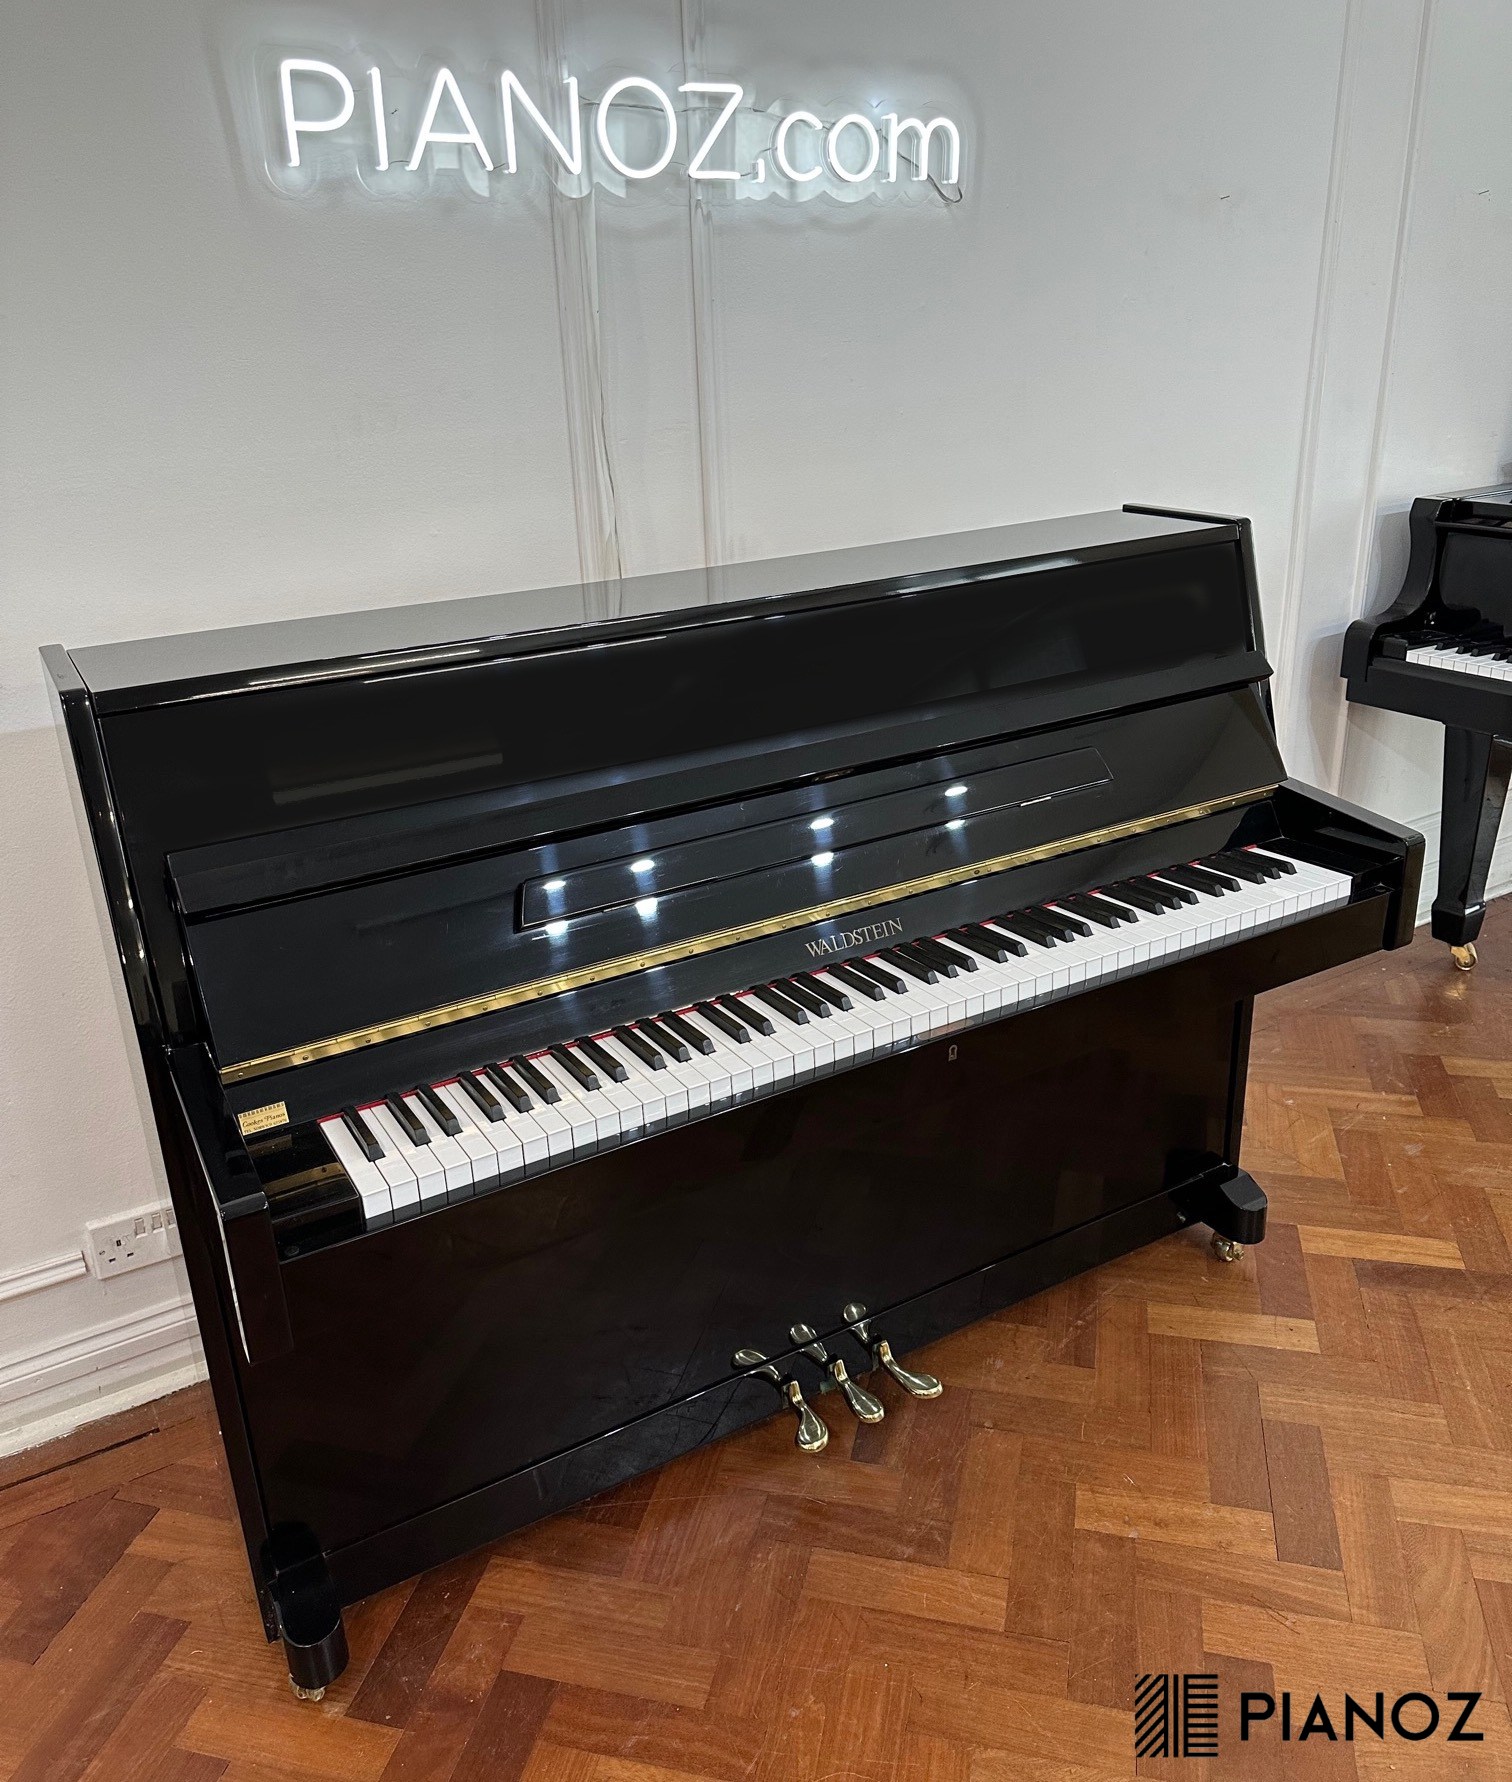 Waldstein 108 Upright Piano piano for sale in UK